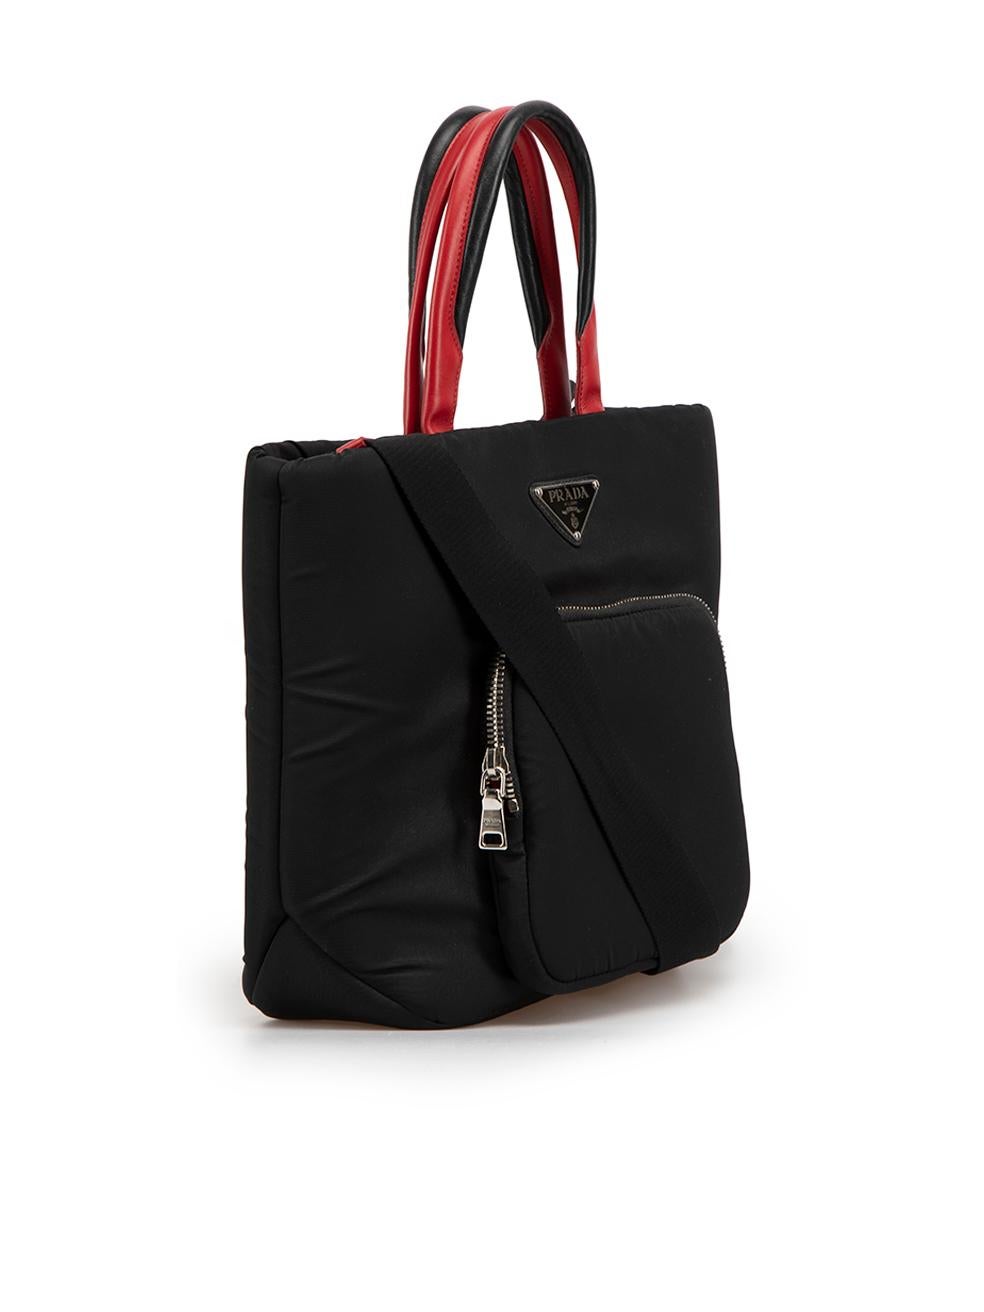 CONDITION is Very Good. Minimal wear to bag is evident. Minimal wear to the lining, front and back with discoloured markings on this used Prada designer resale item.



Details


Black

Nylon

Handbag

Silver tone hardware

2x Black and red leather